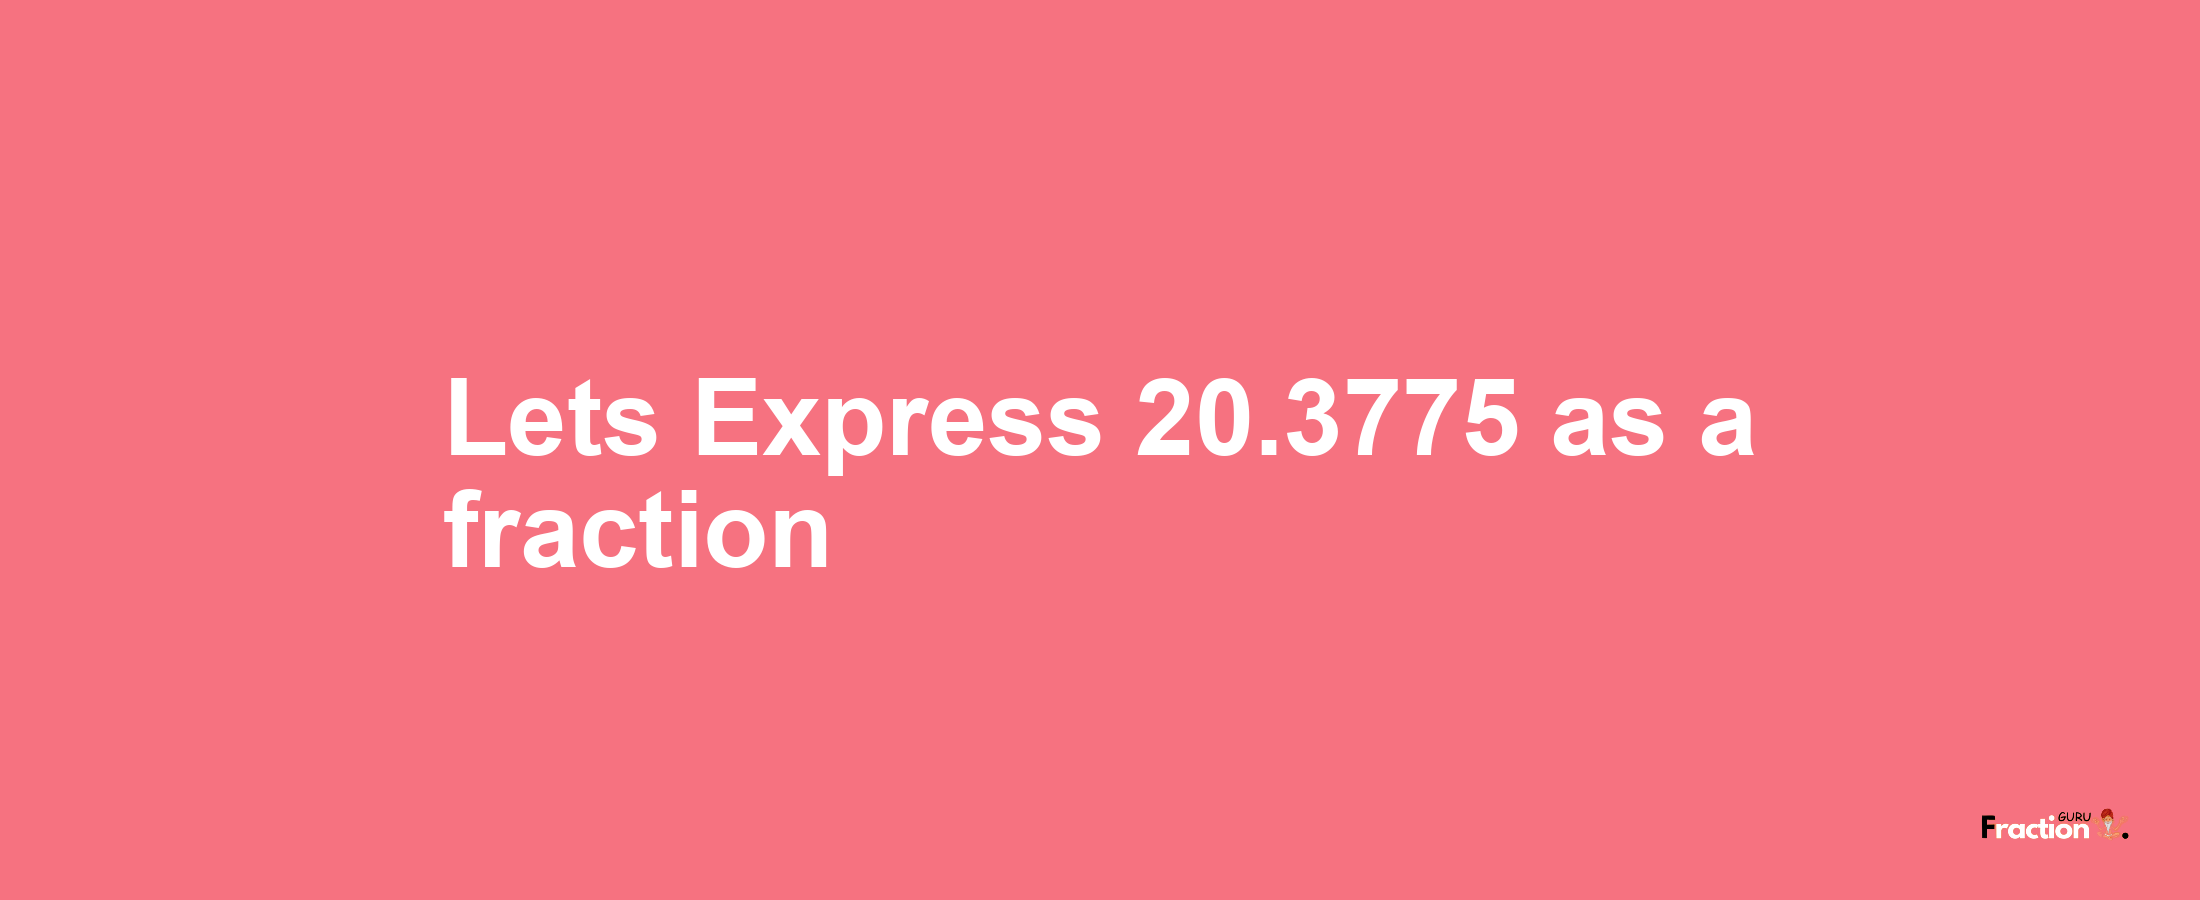 Lets Express 20.3775 as afraction